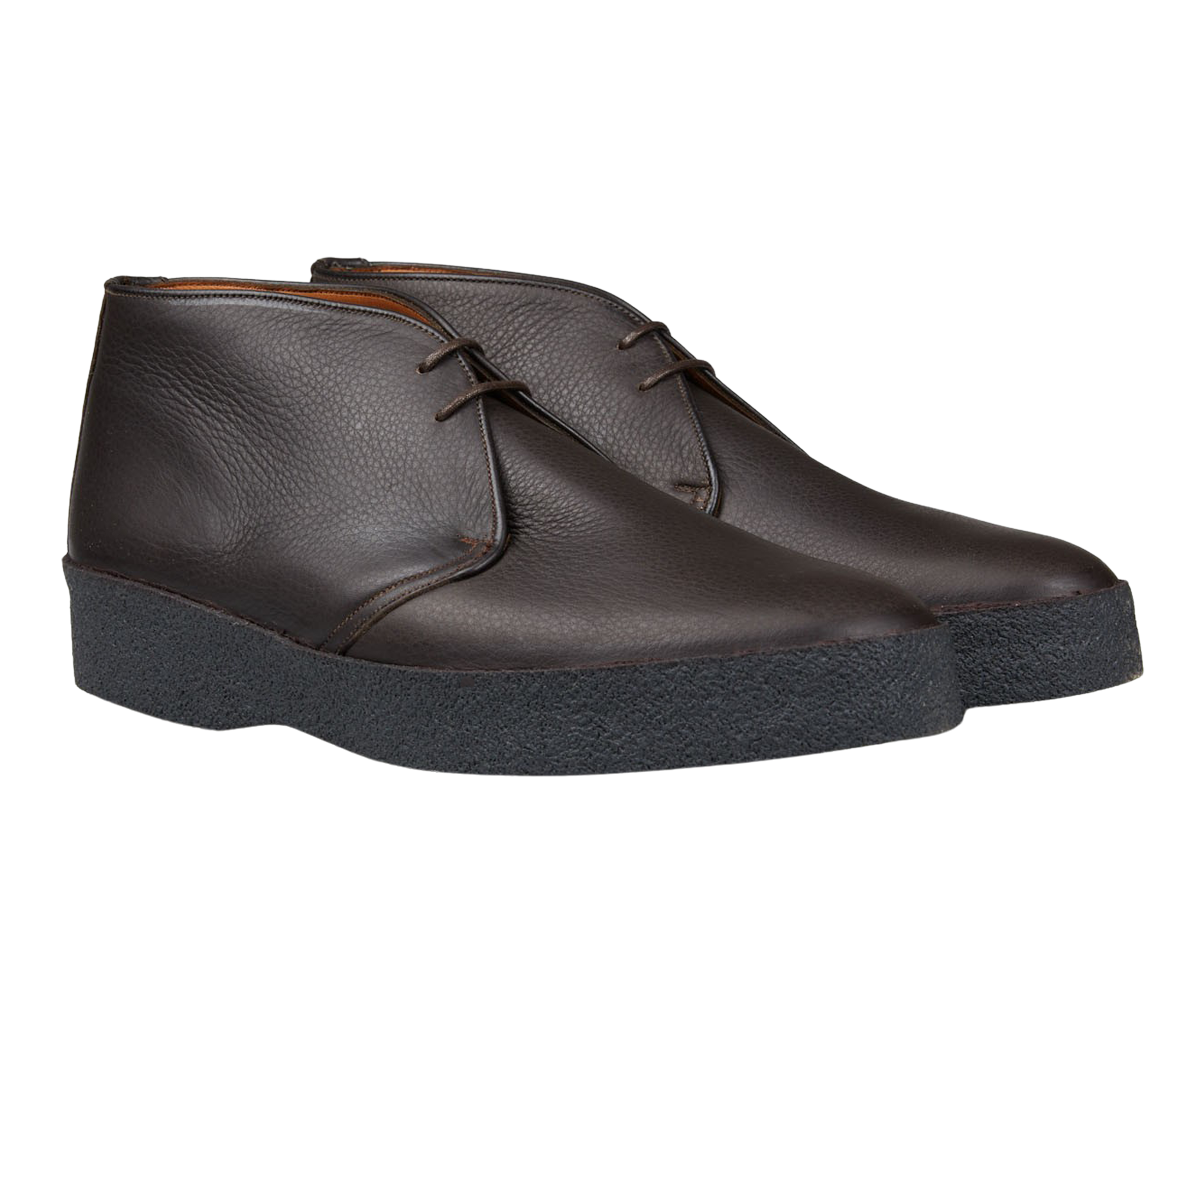 A pair of Dark Brown Savage Grain Hi Top Chukka Boots by Sanders with rubber crepe soles.